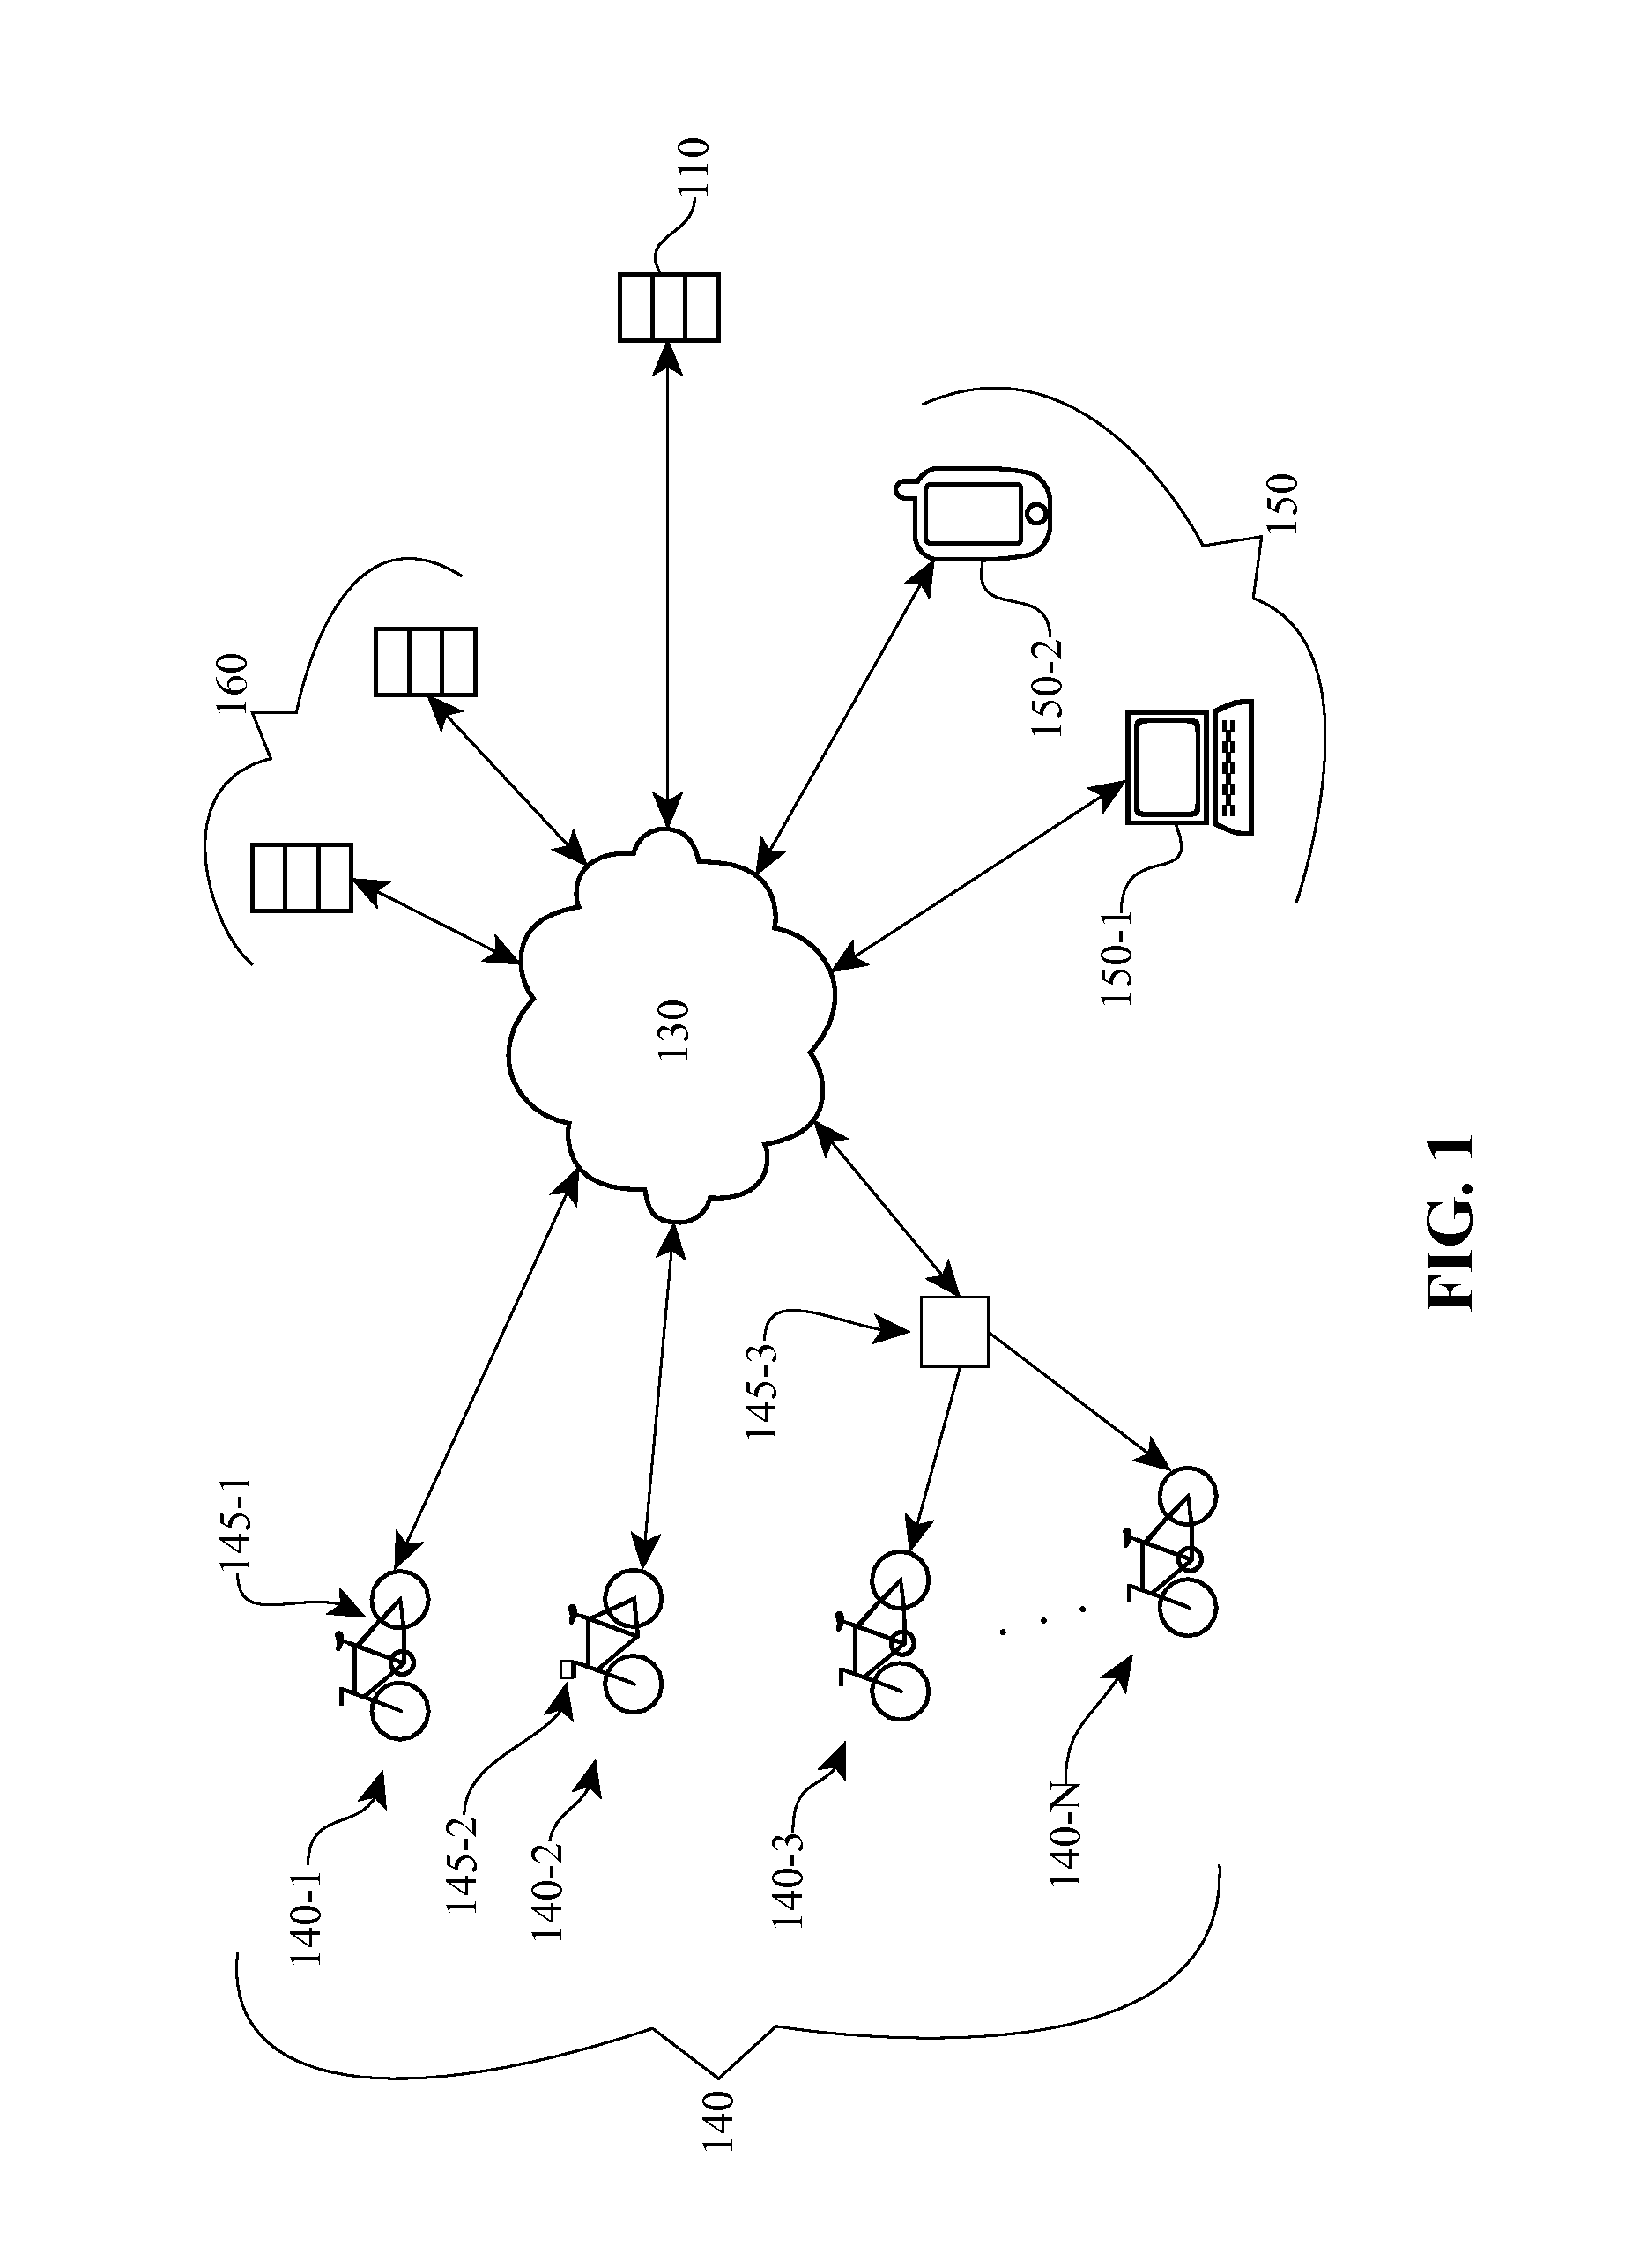 Components, systems and methods of bicycle-based network connectivity and methods for controlling a bicycle having network connectivity